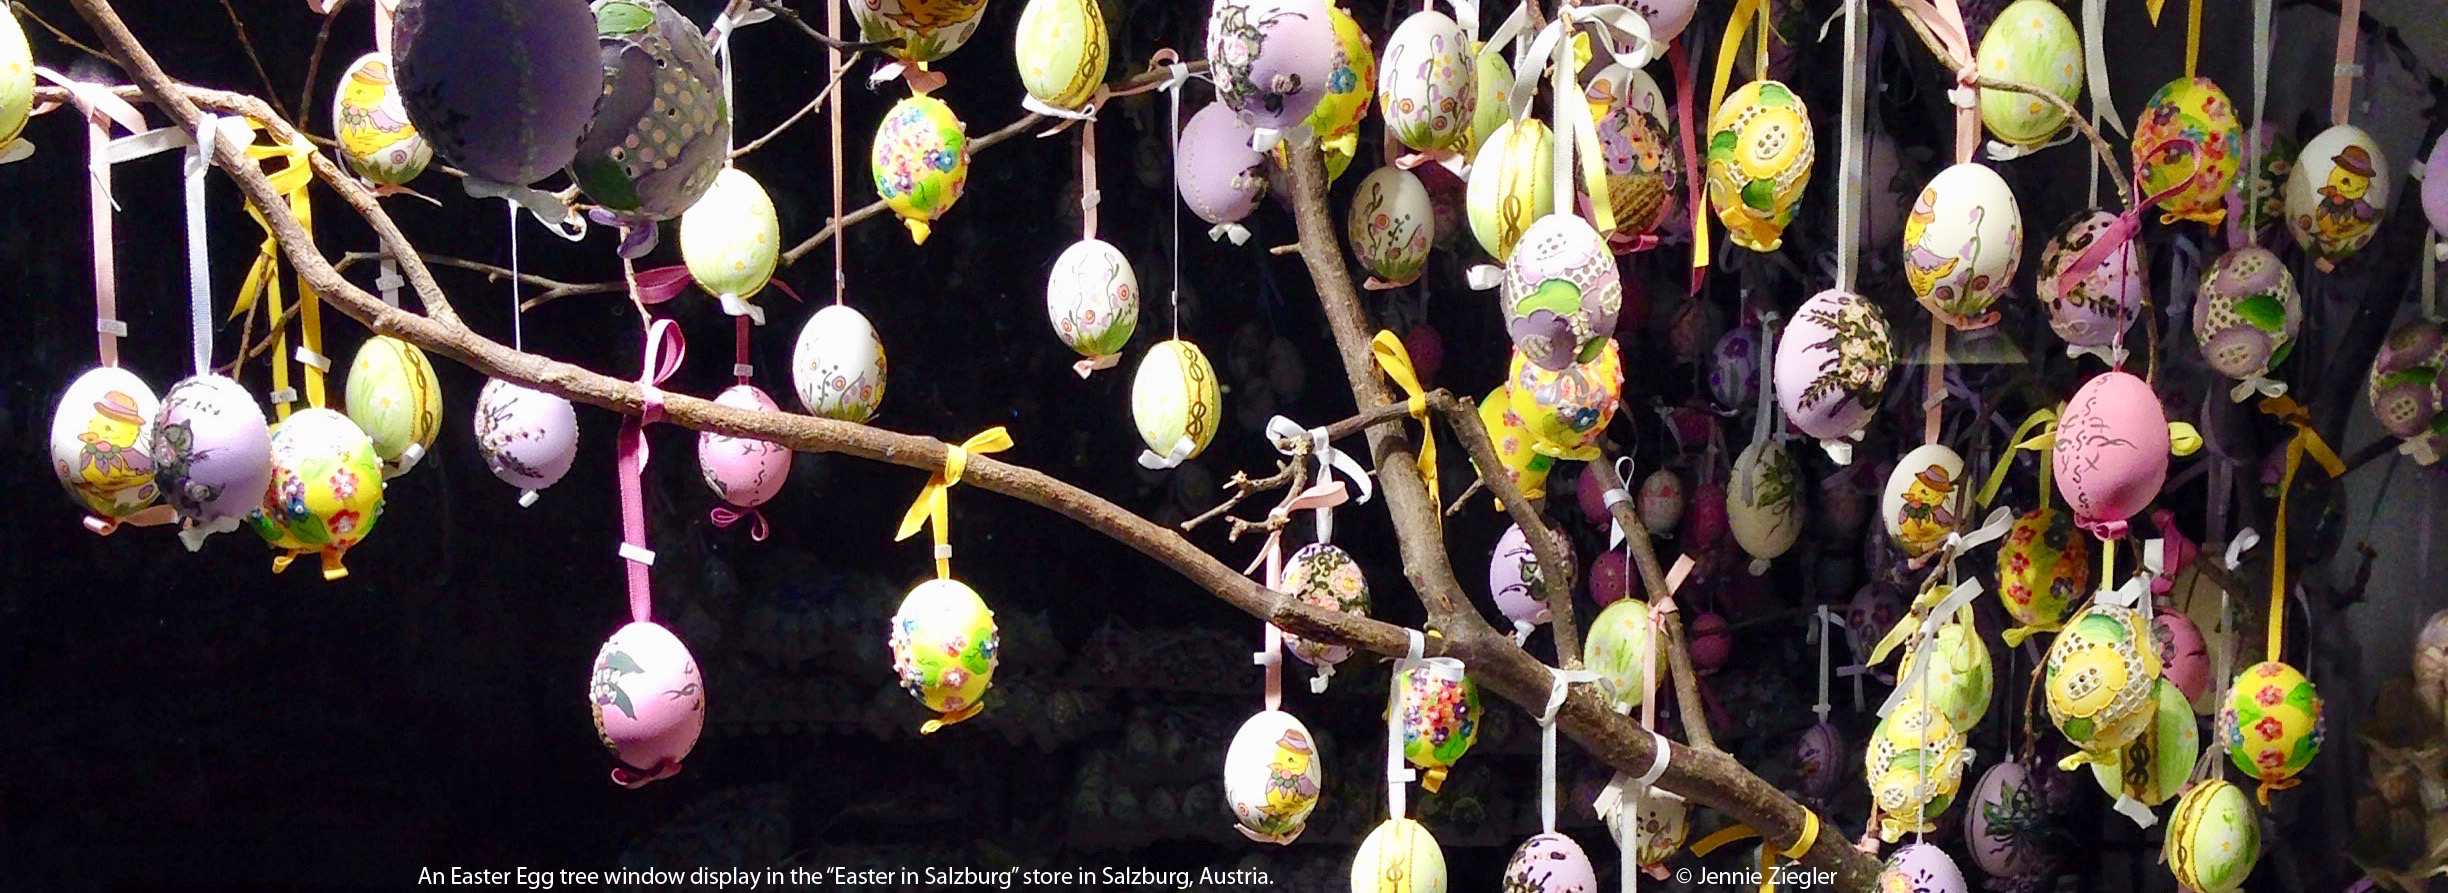 A Forest of Folklore: The Easter Egg Tree